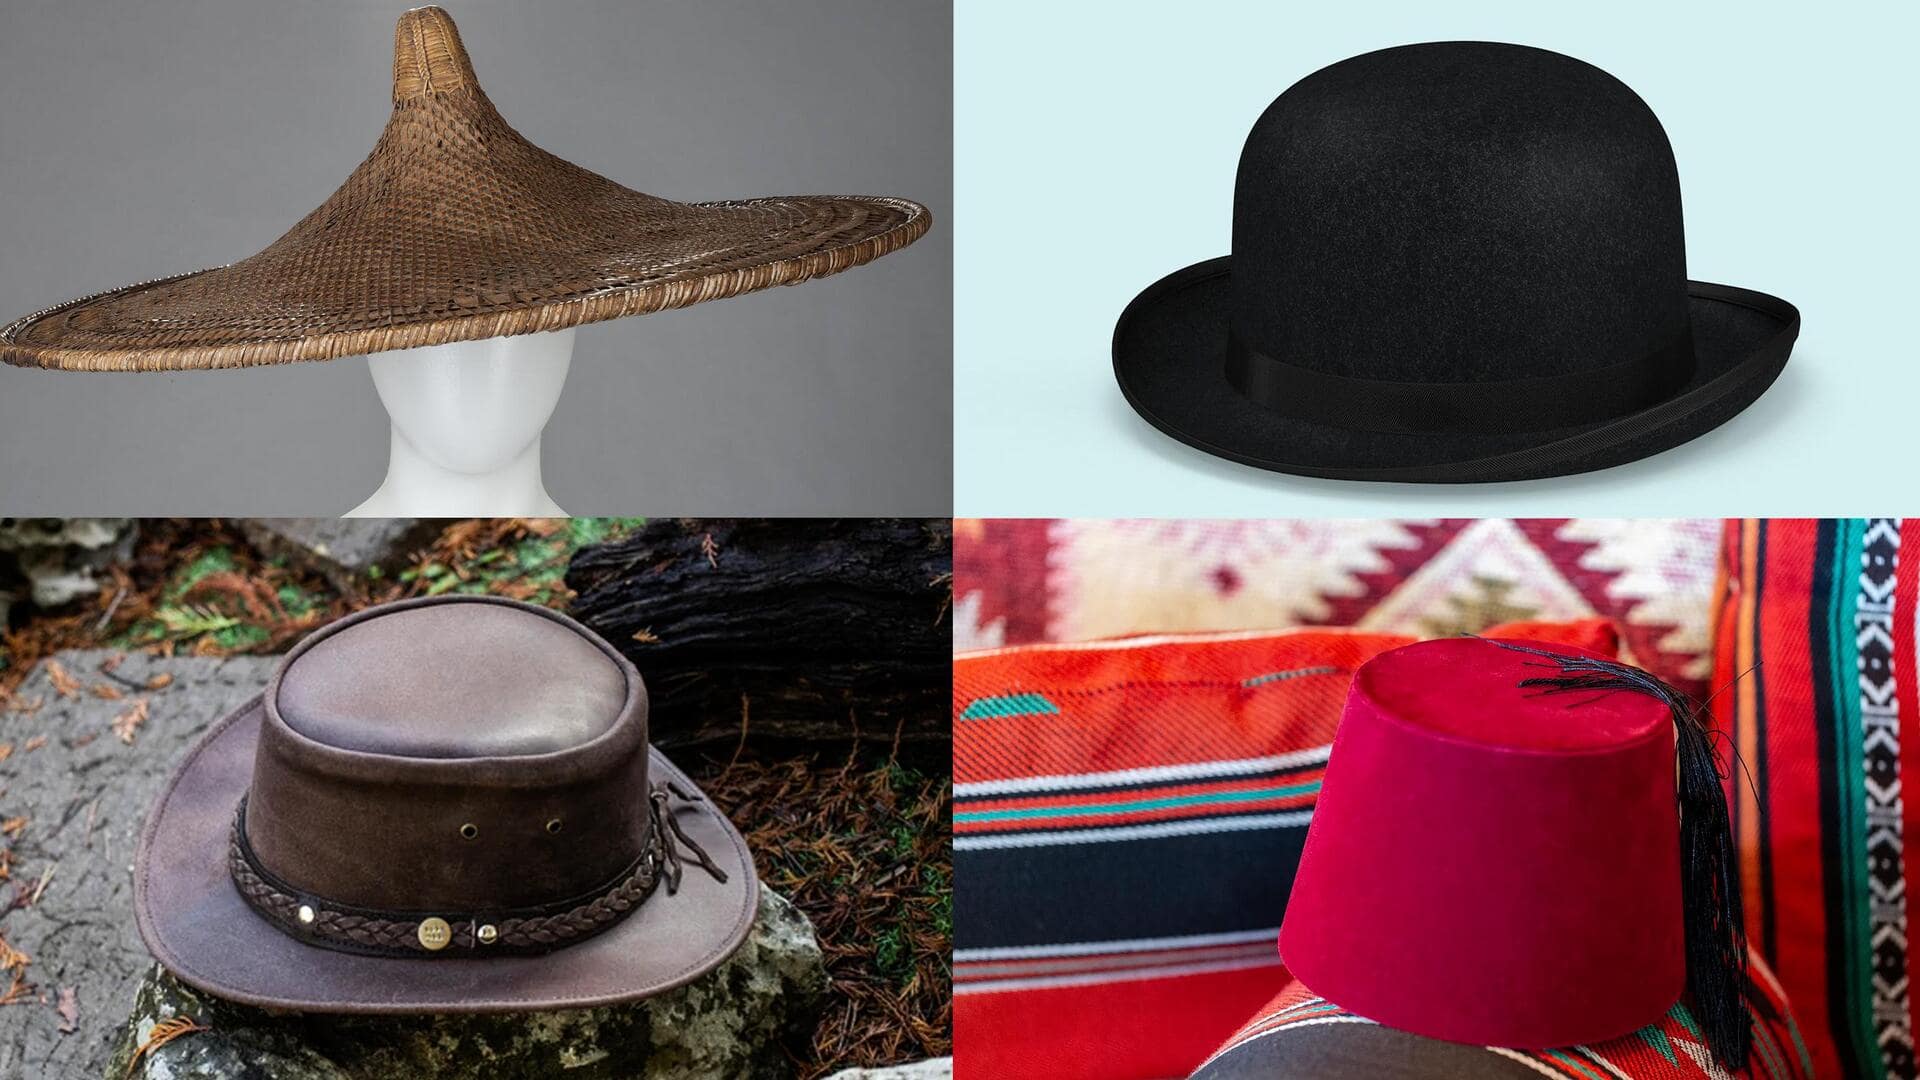 Hats off to diversity: Exploring headwear from around the world 